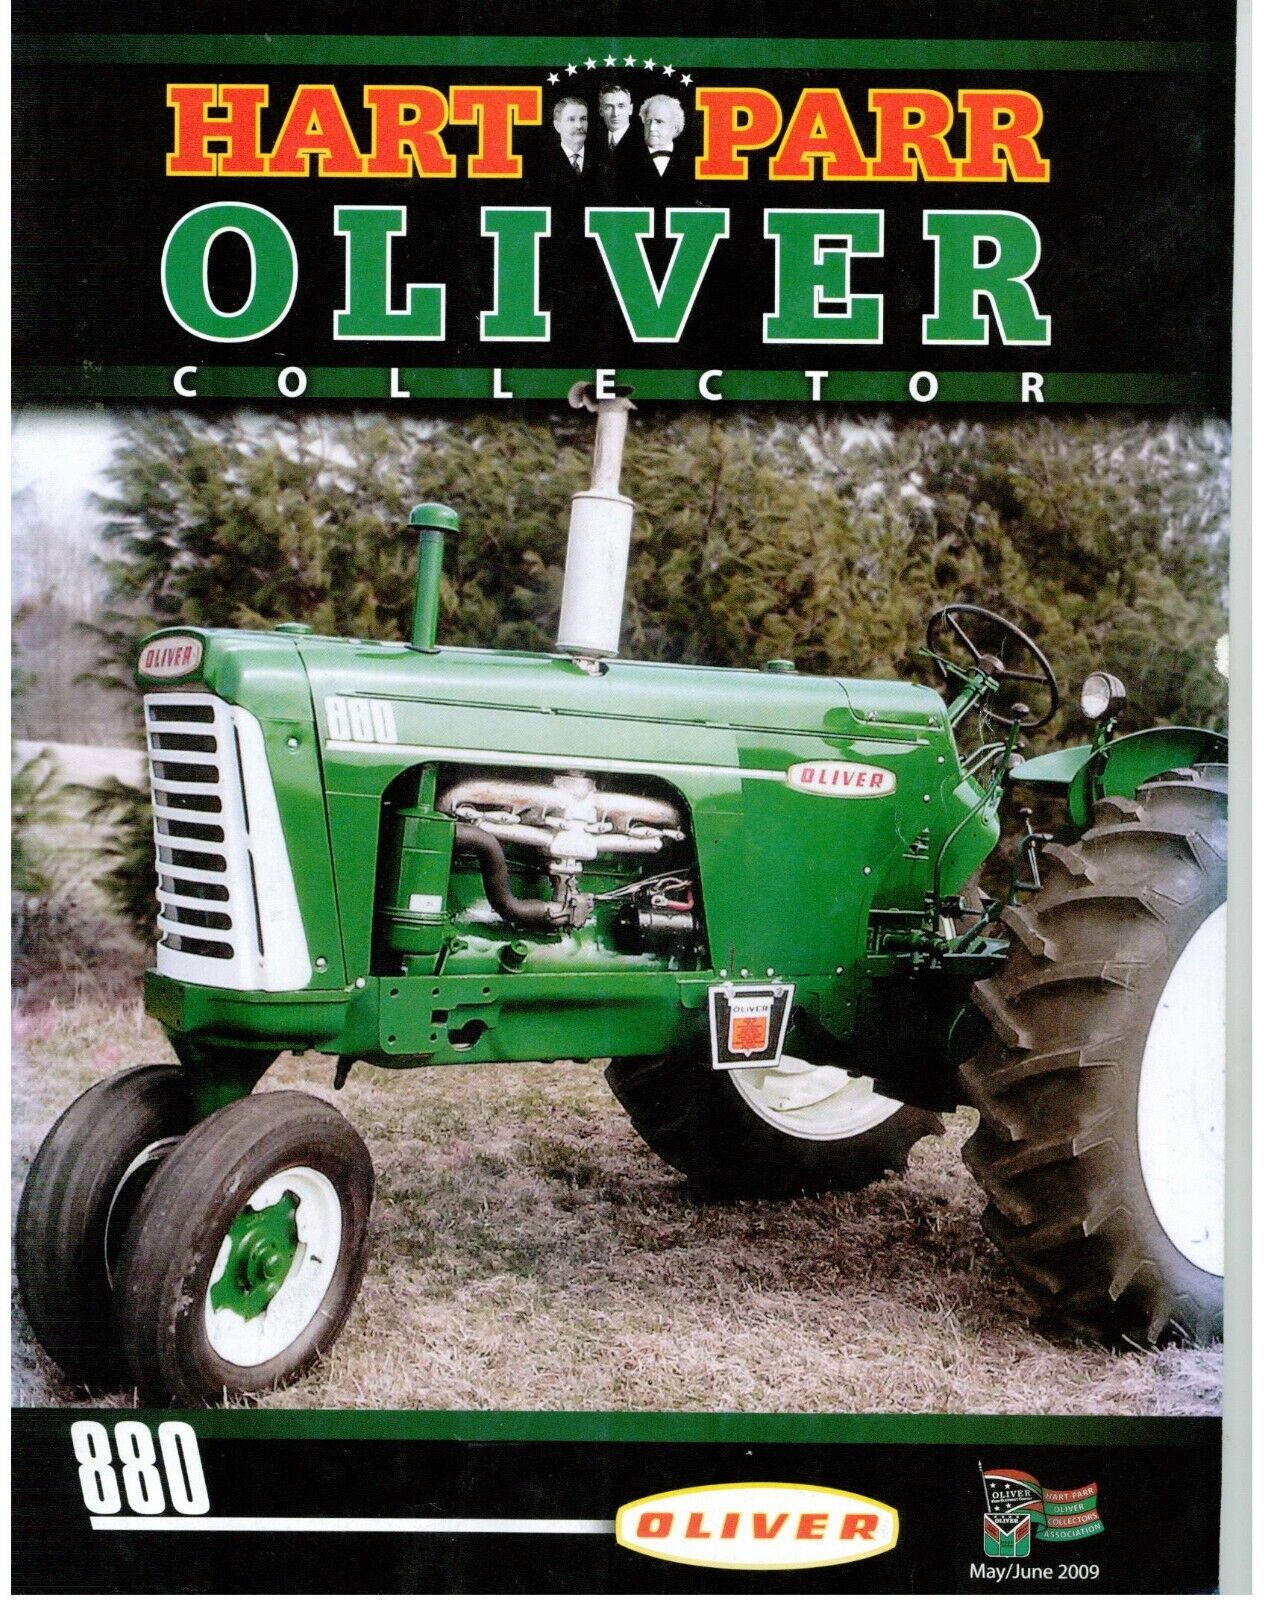 Oliver 880 Tractor Information & Build Card Codes, Oliver 77 78 & 79 Plows